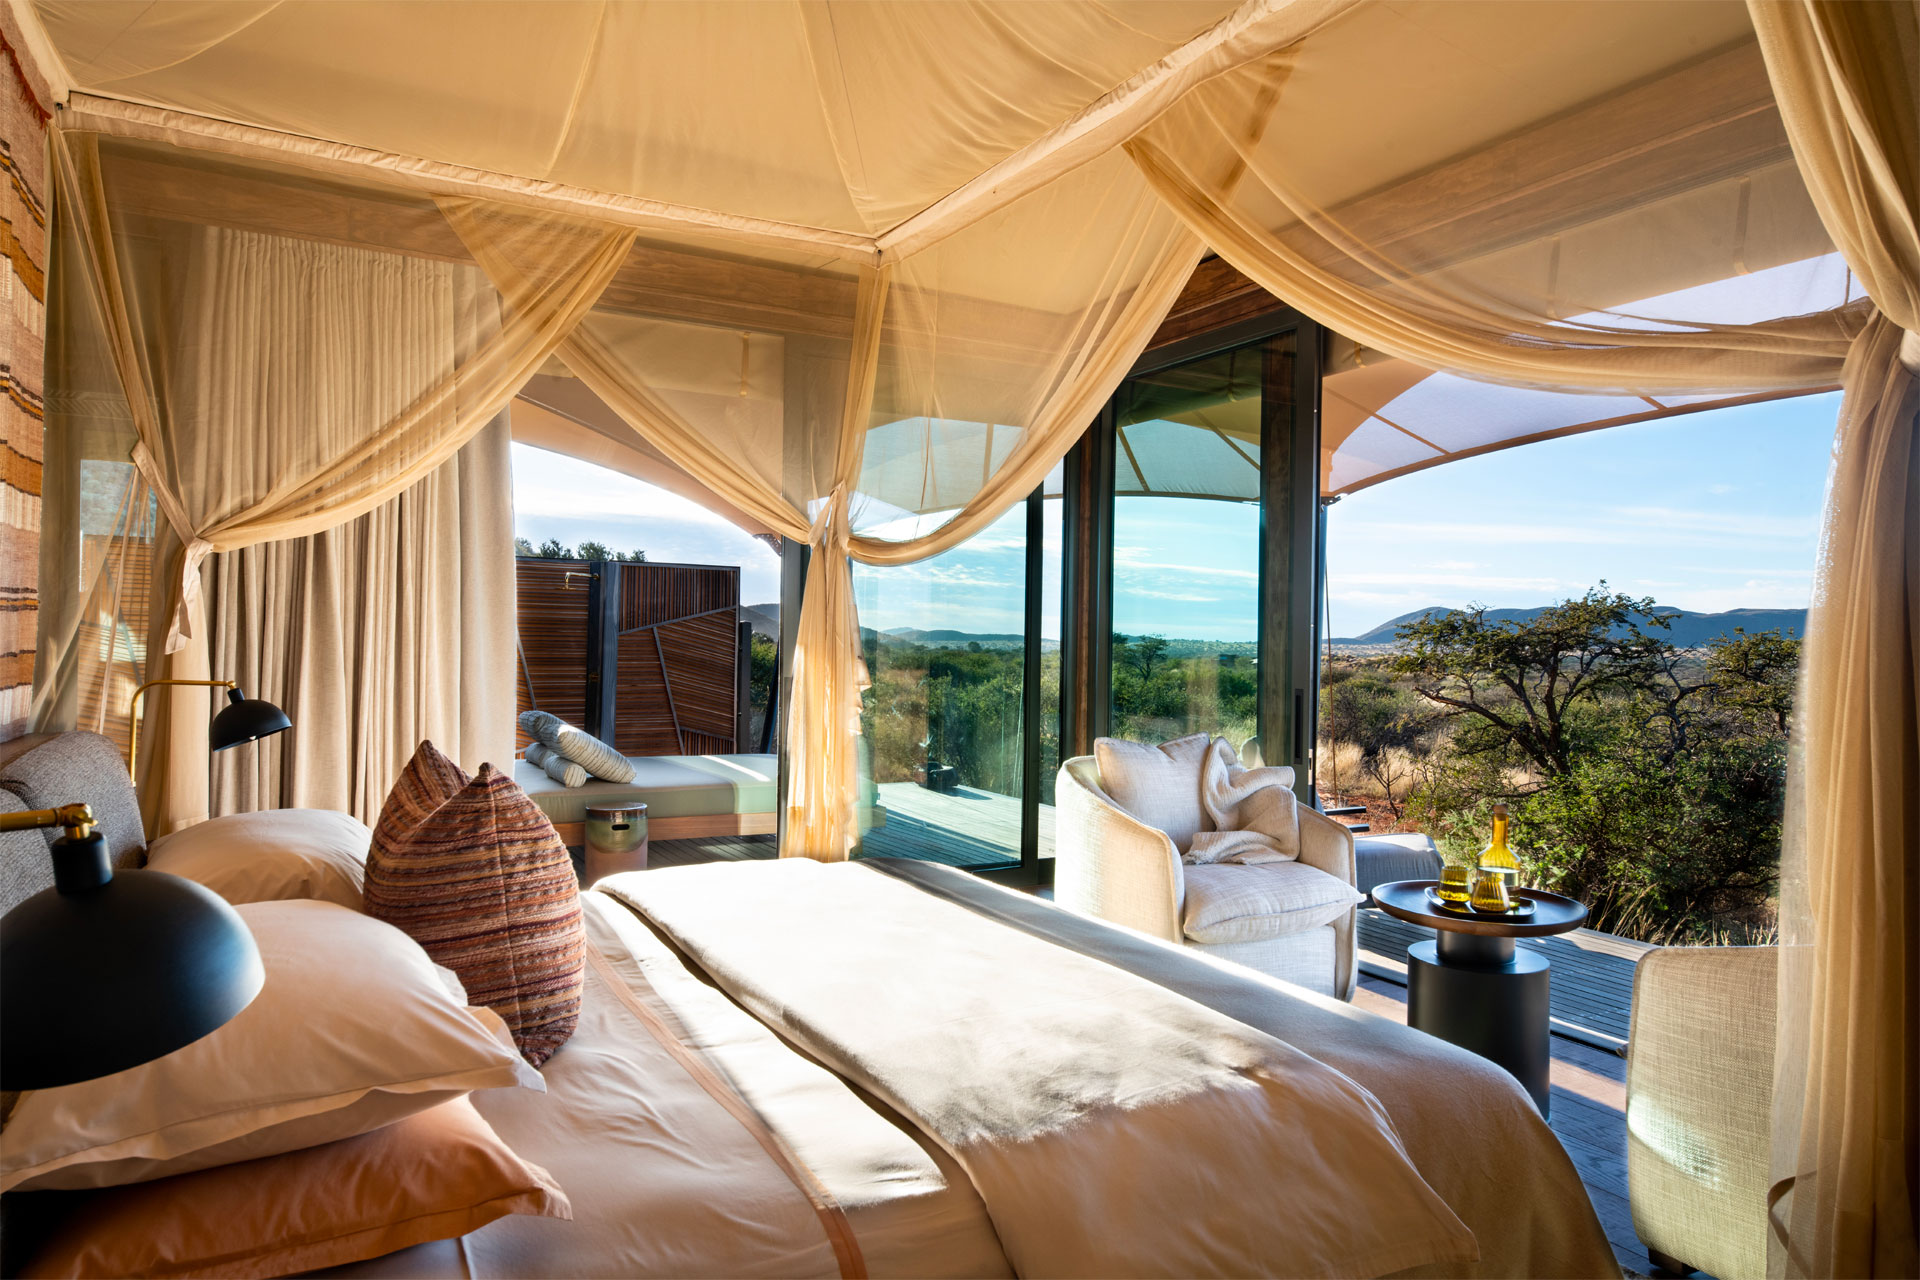 These Are The Most Beautiful Hotel Rooms In The World